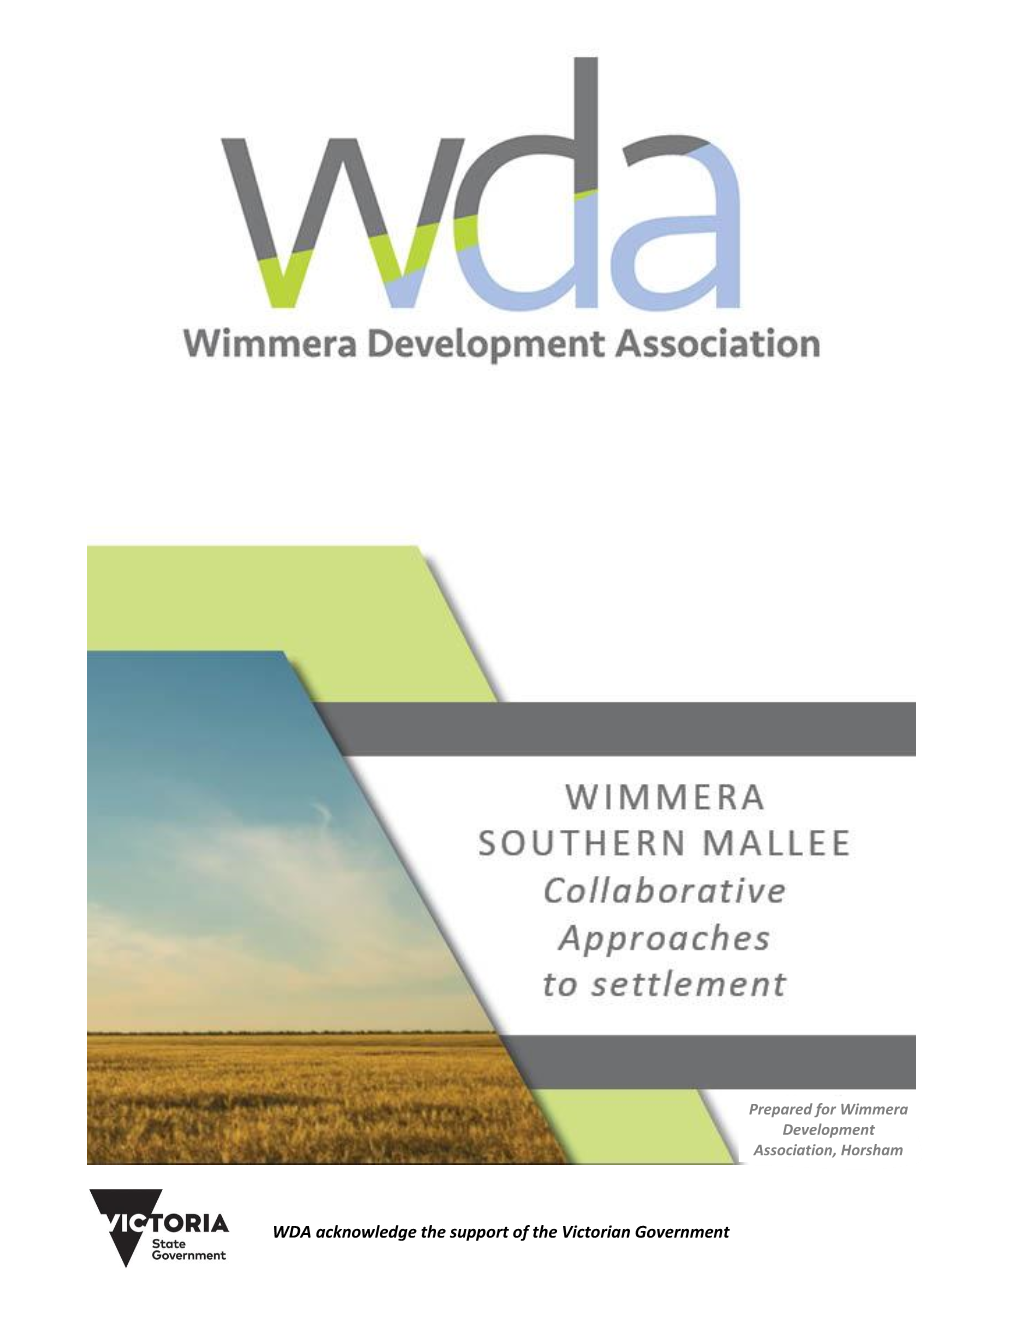 WDA Acknowledge the Support of the Victorian Government